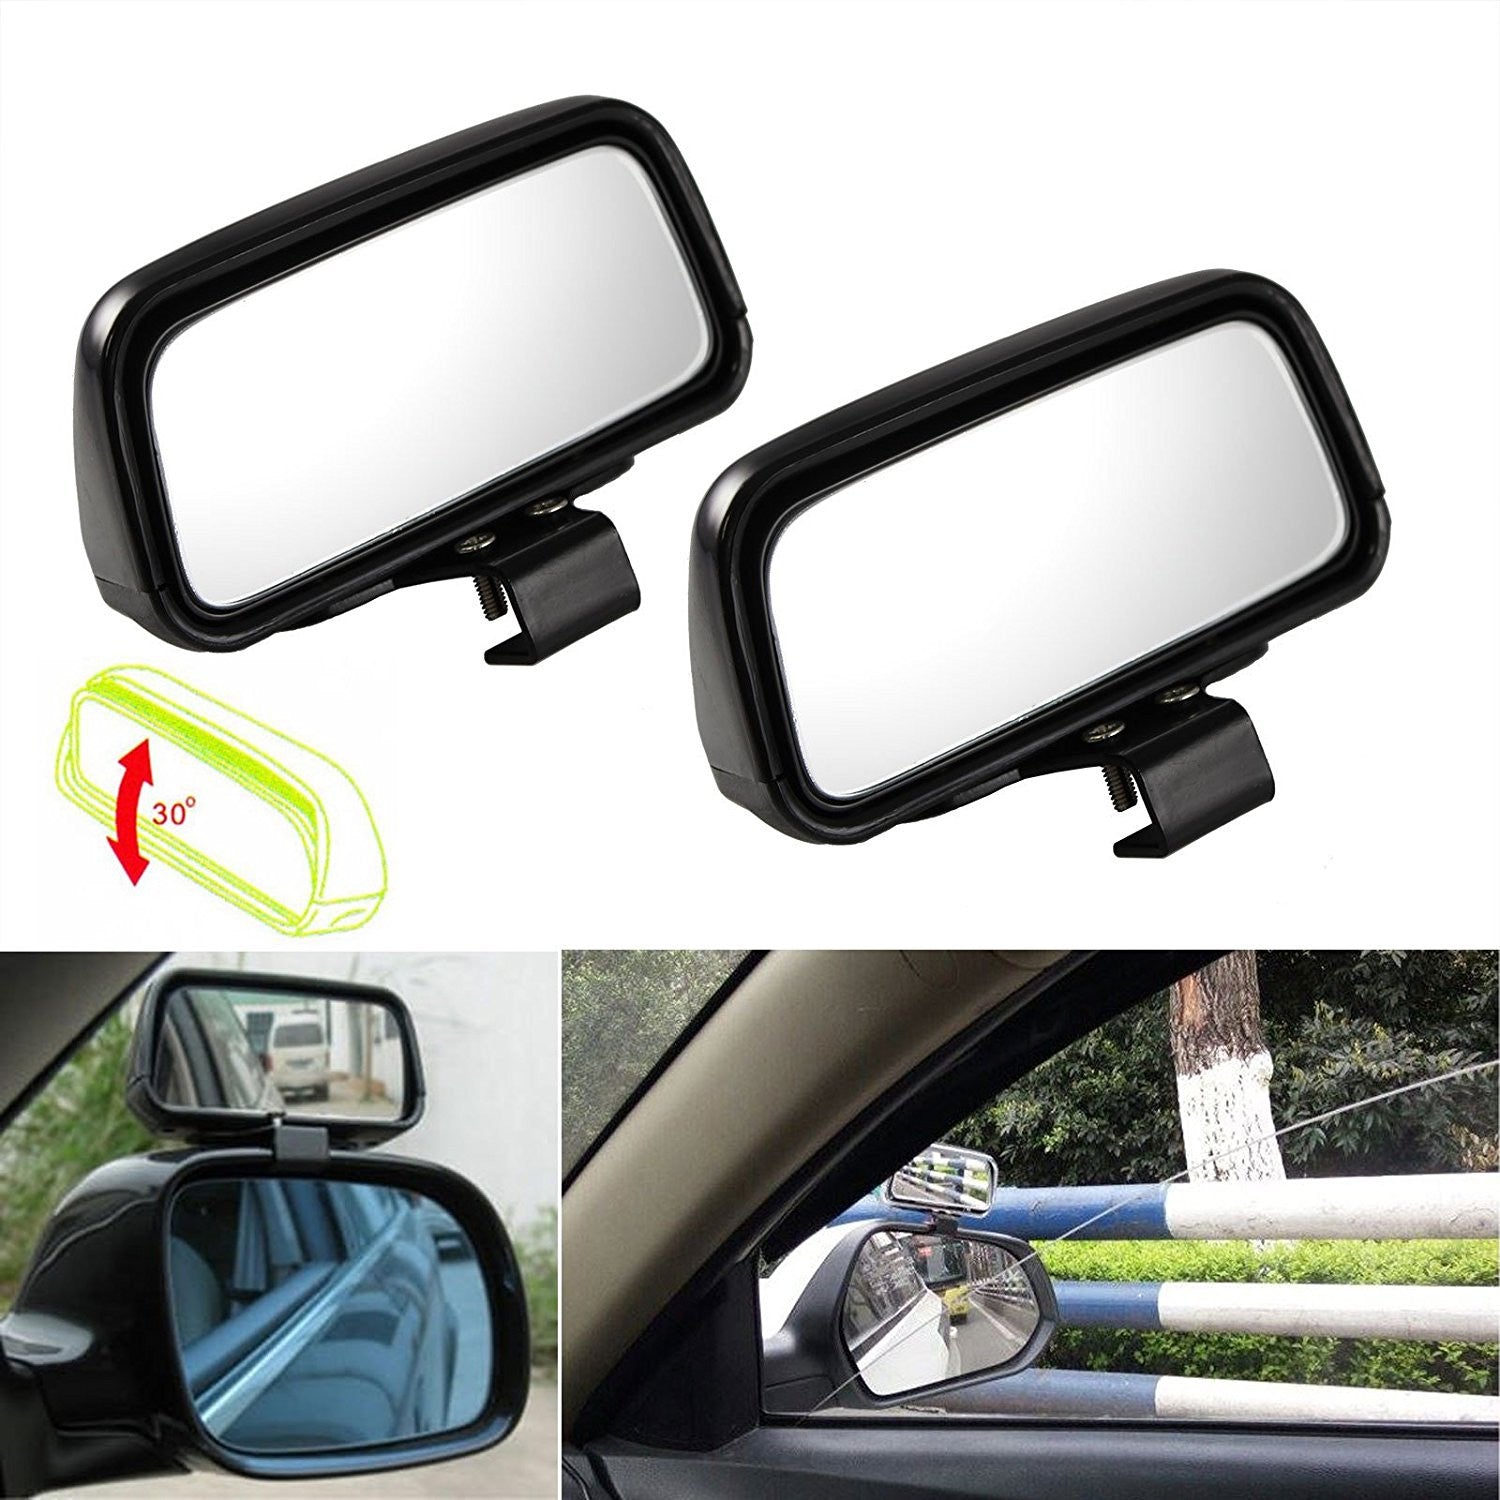  Blind Spot Mirror - Adjustable 360 Degree Rotation Car  Auxiliary Convex Wide Angle Mirror Snap Way Clip On Side Rearview Mirror  Universal for Cars Truck SUVs : Automotive